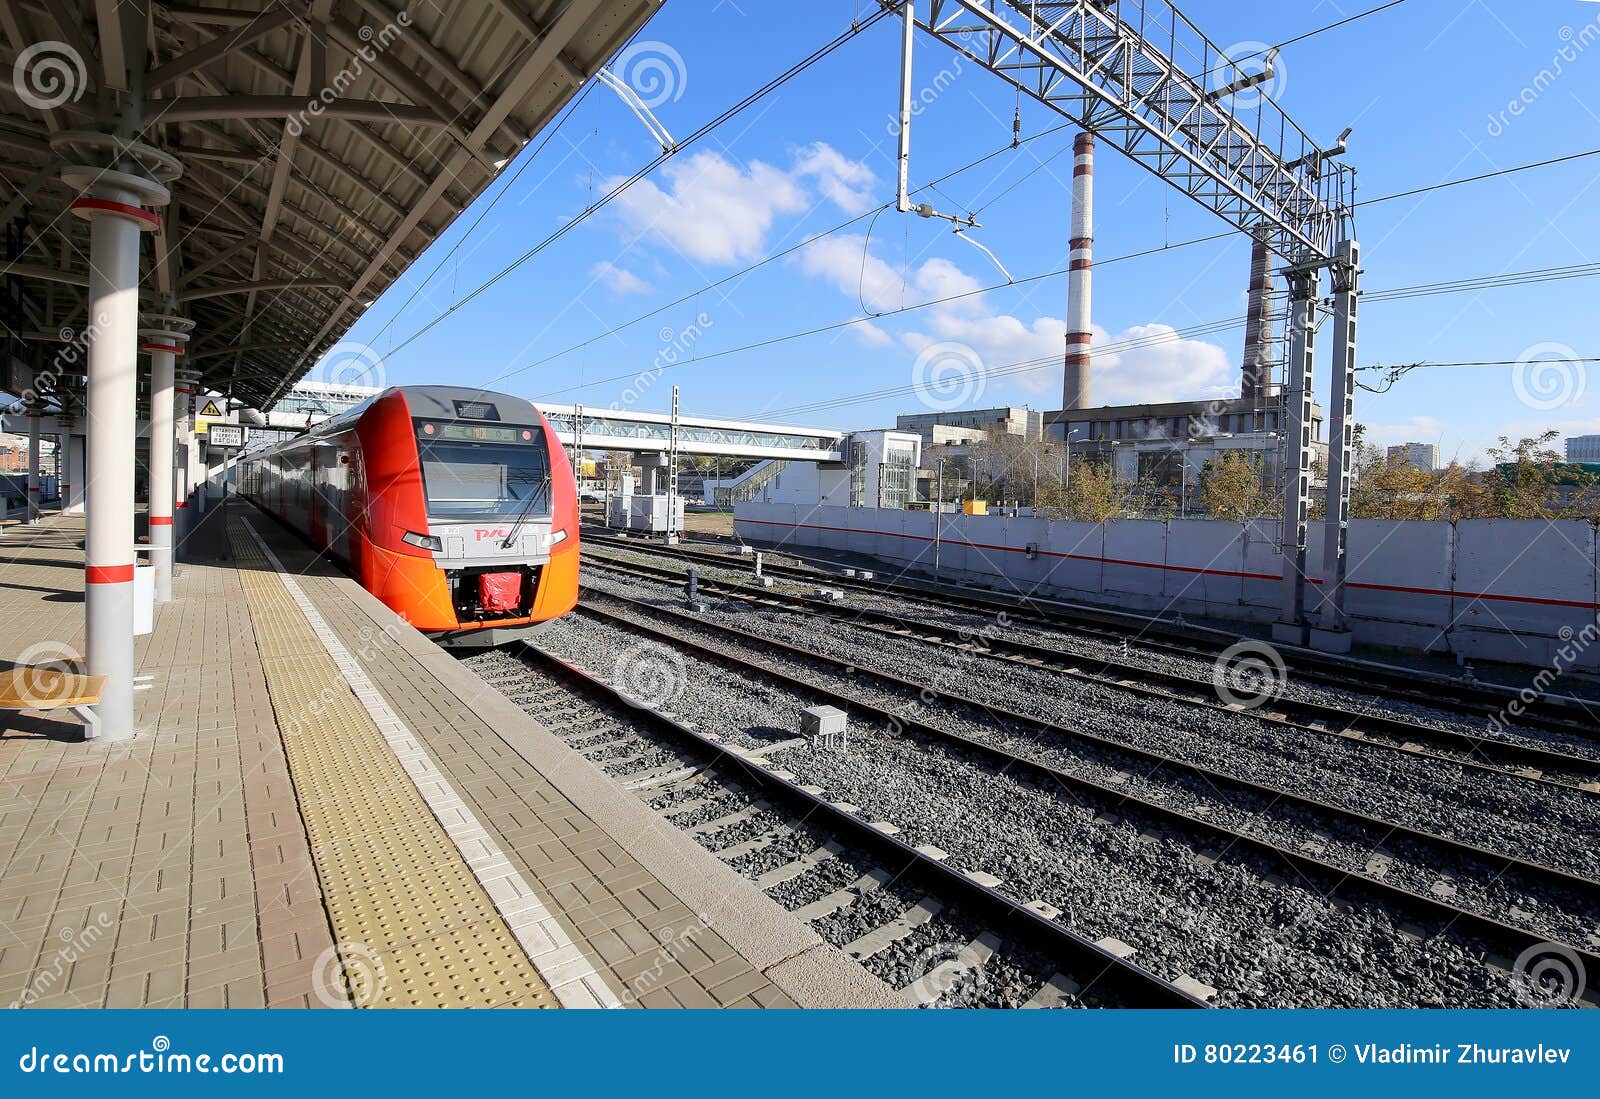 Image of Summerhill Railway Station-YL881435-Picxy